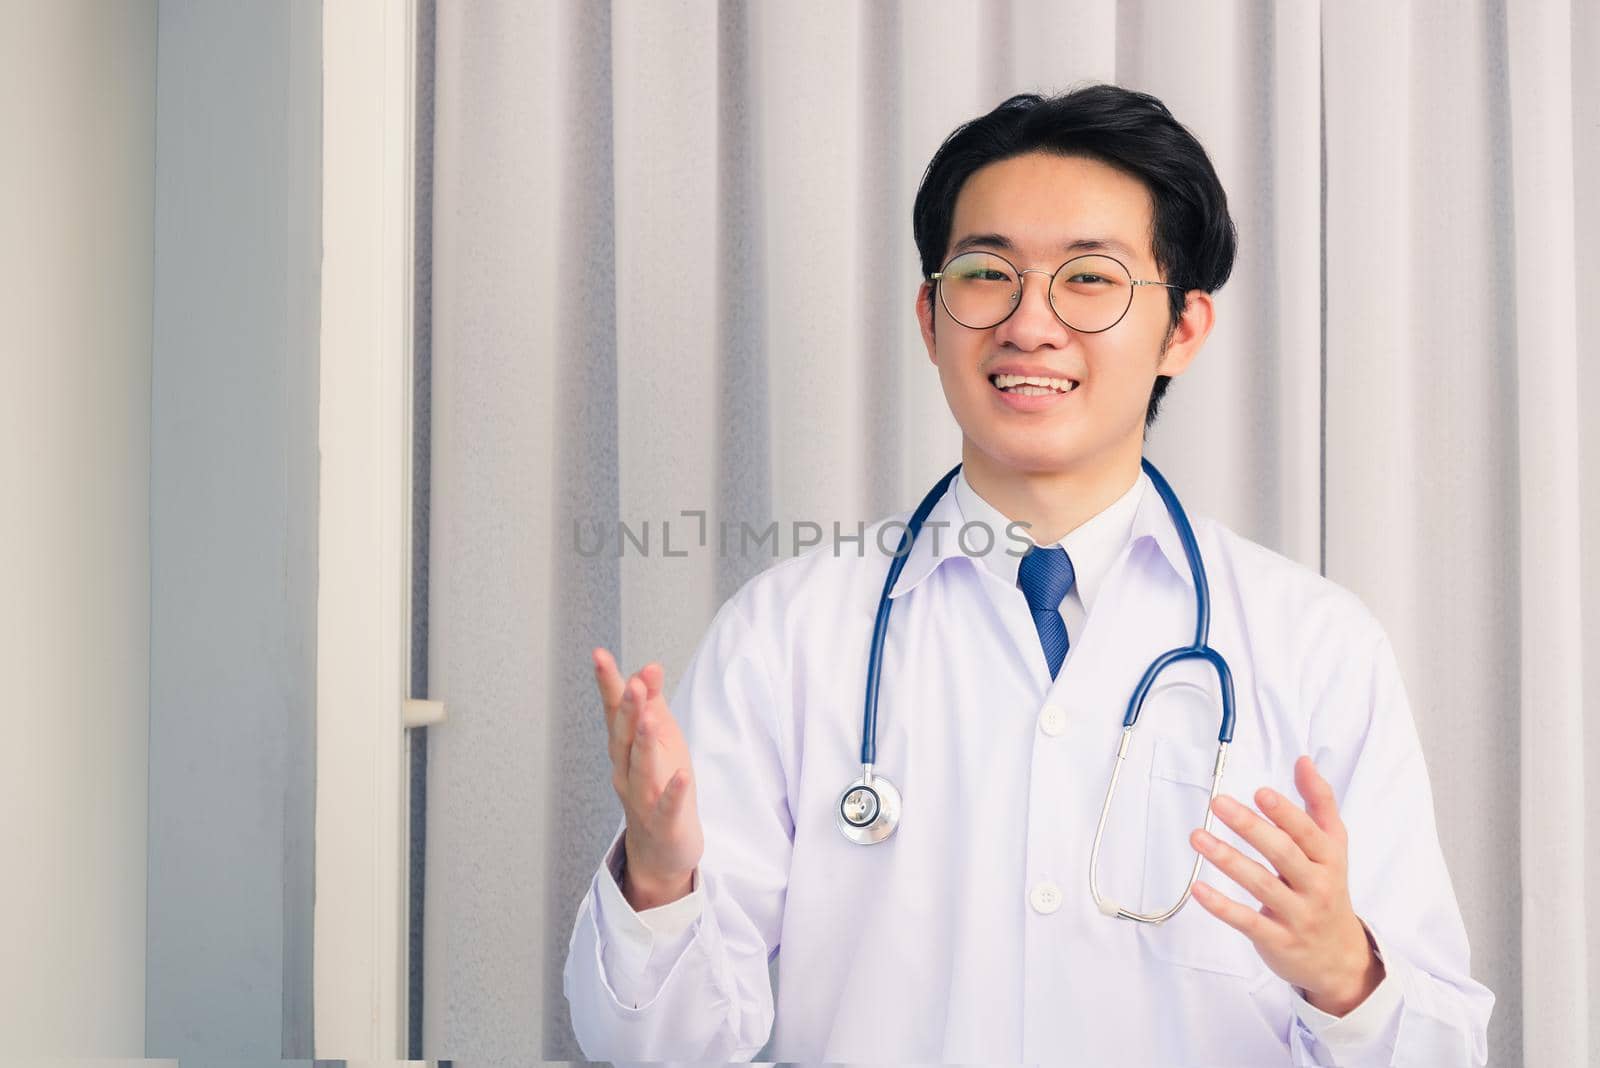 Portrait of Happy Asian young doctor handsome man smiling in uniform with stethoscope talking online video conference call or facetime raise his hand to explain, healthcare medicine concept